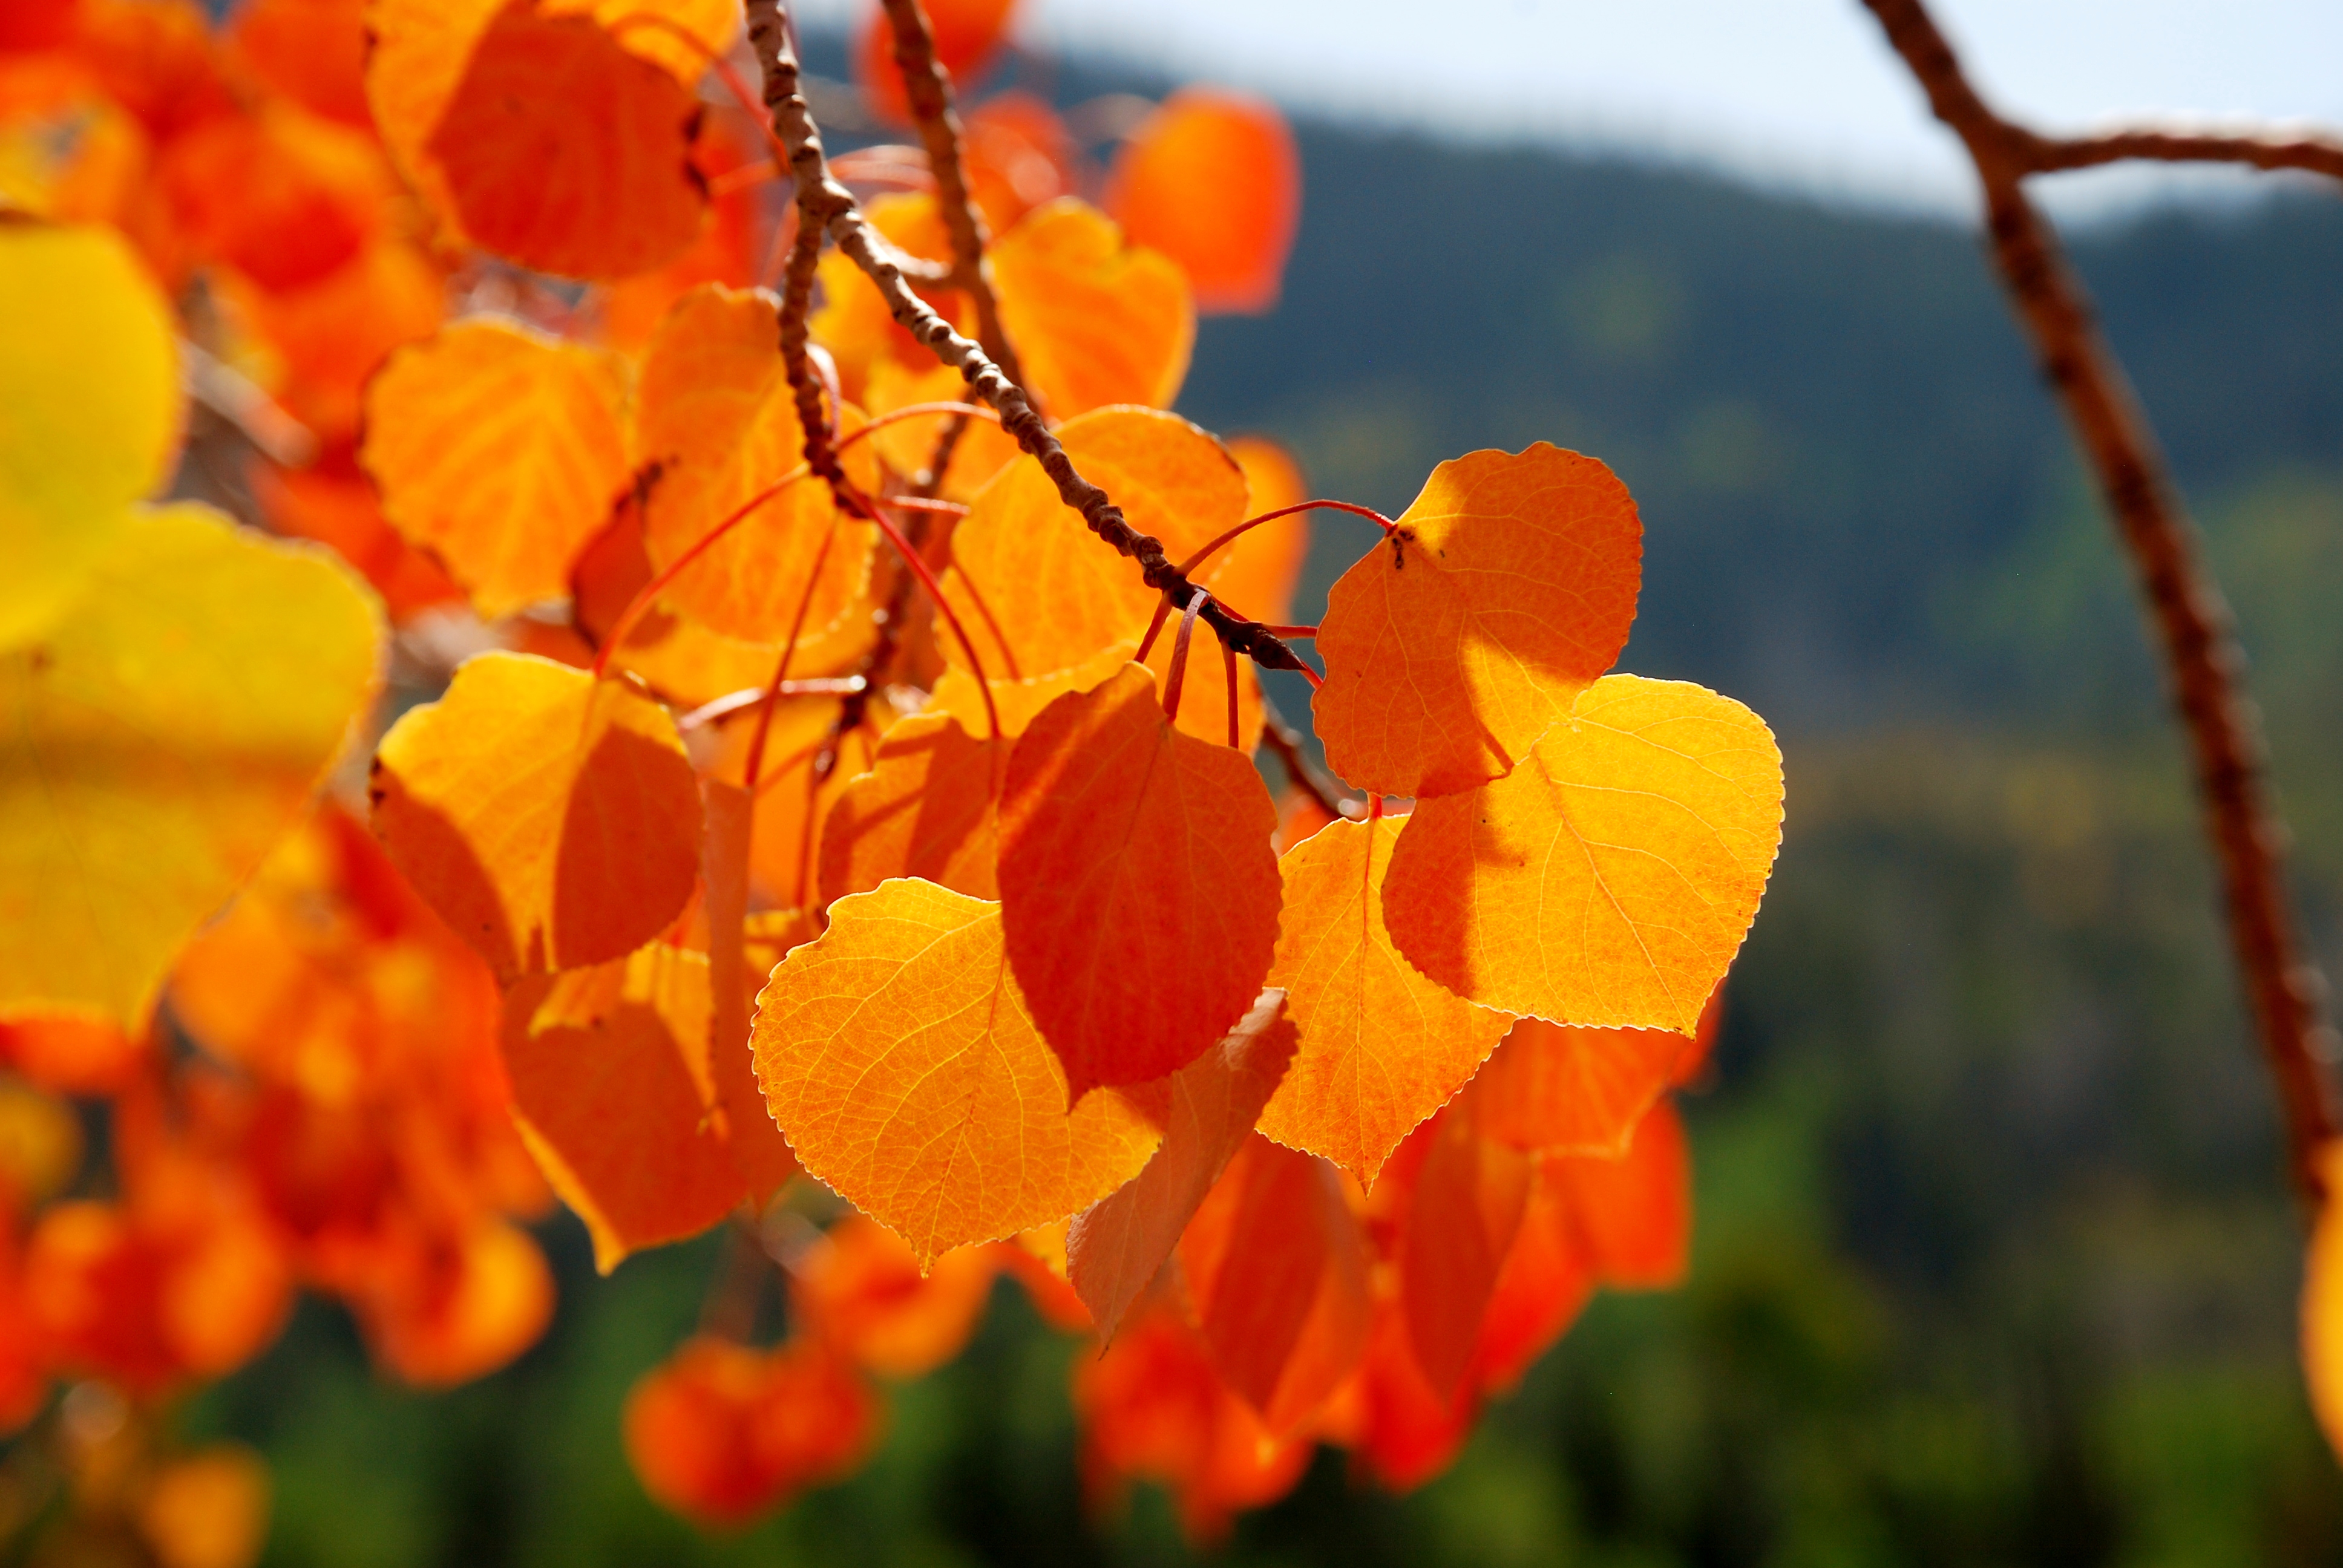 Aspen leafs: fall colors. Beaver Ranger District, Fishlake National Forest. (Forest Service Photo by Scott Bell)